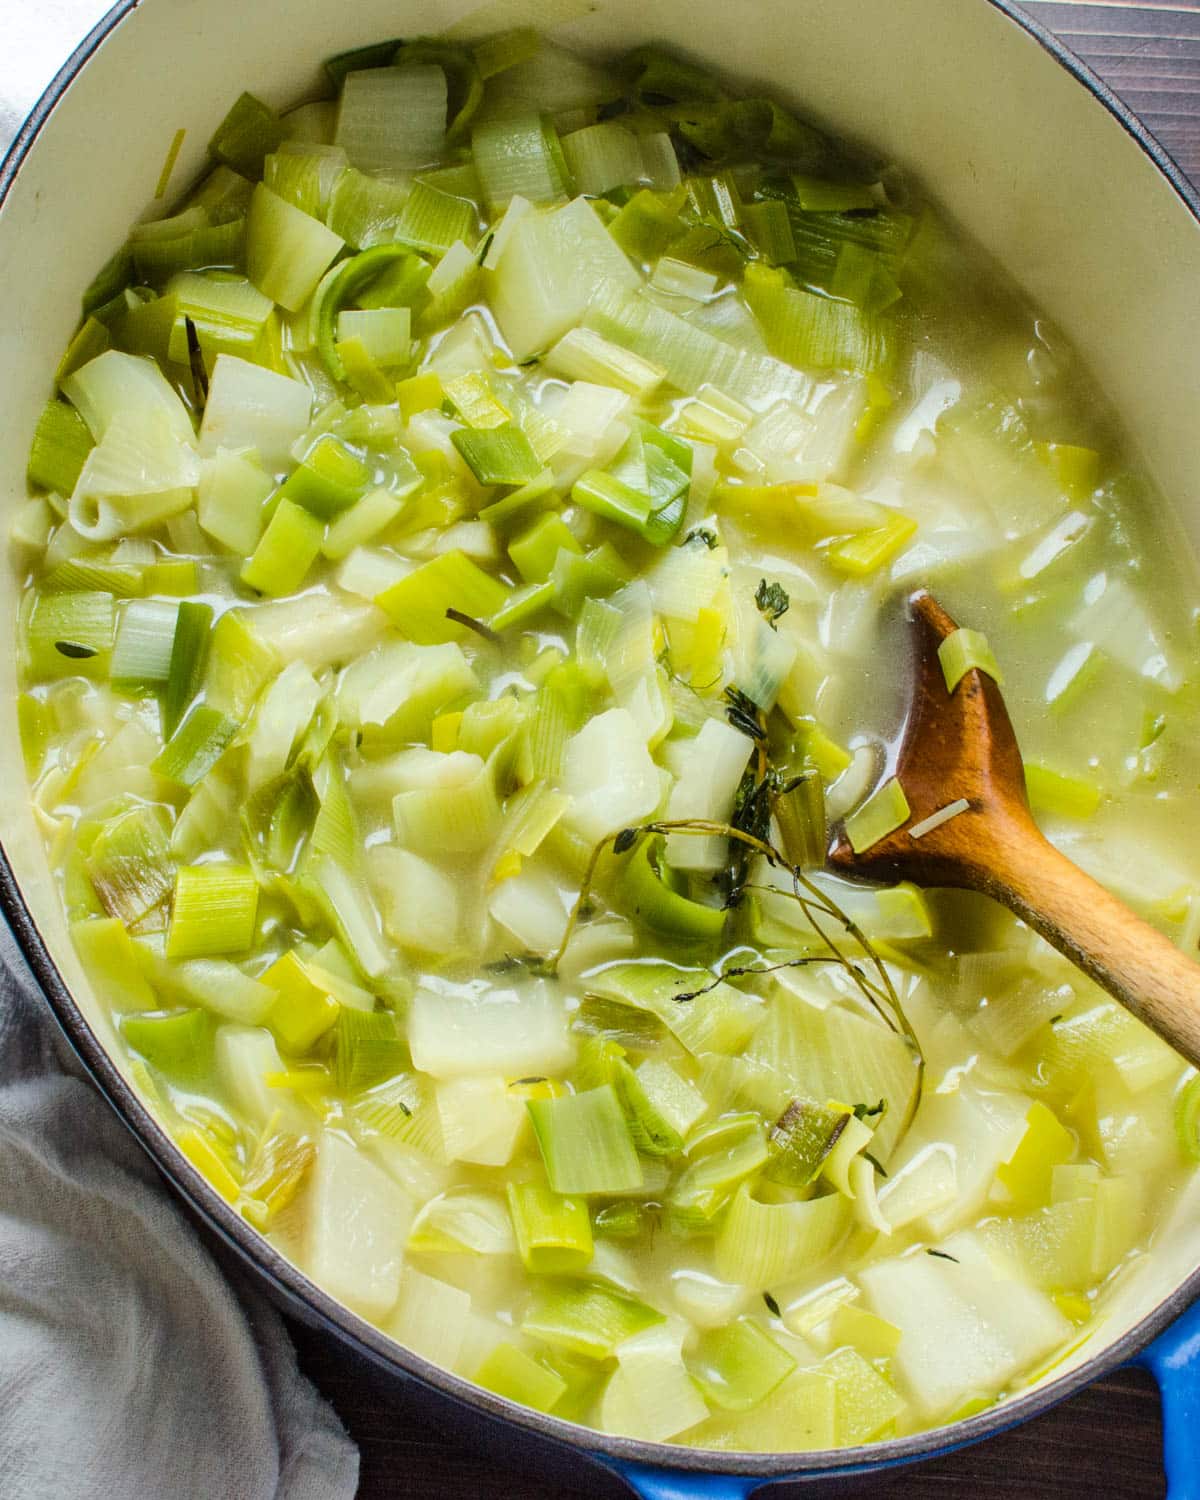 simmering the fennel and leeks with vegetable stock.